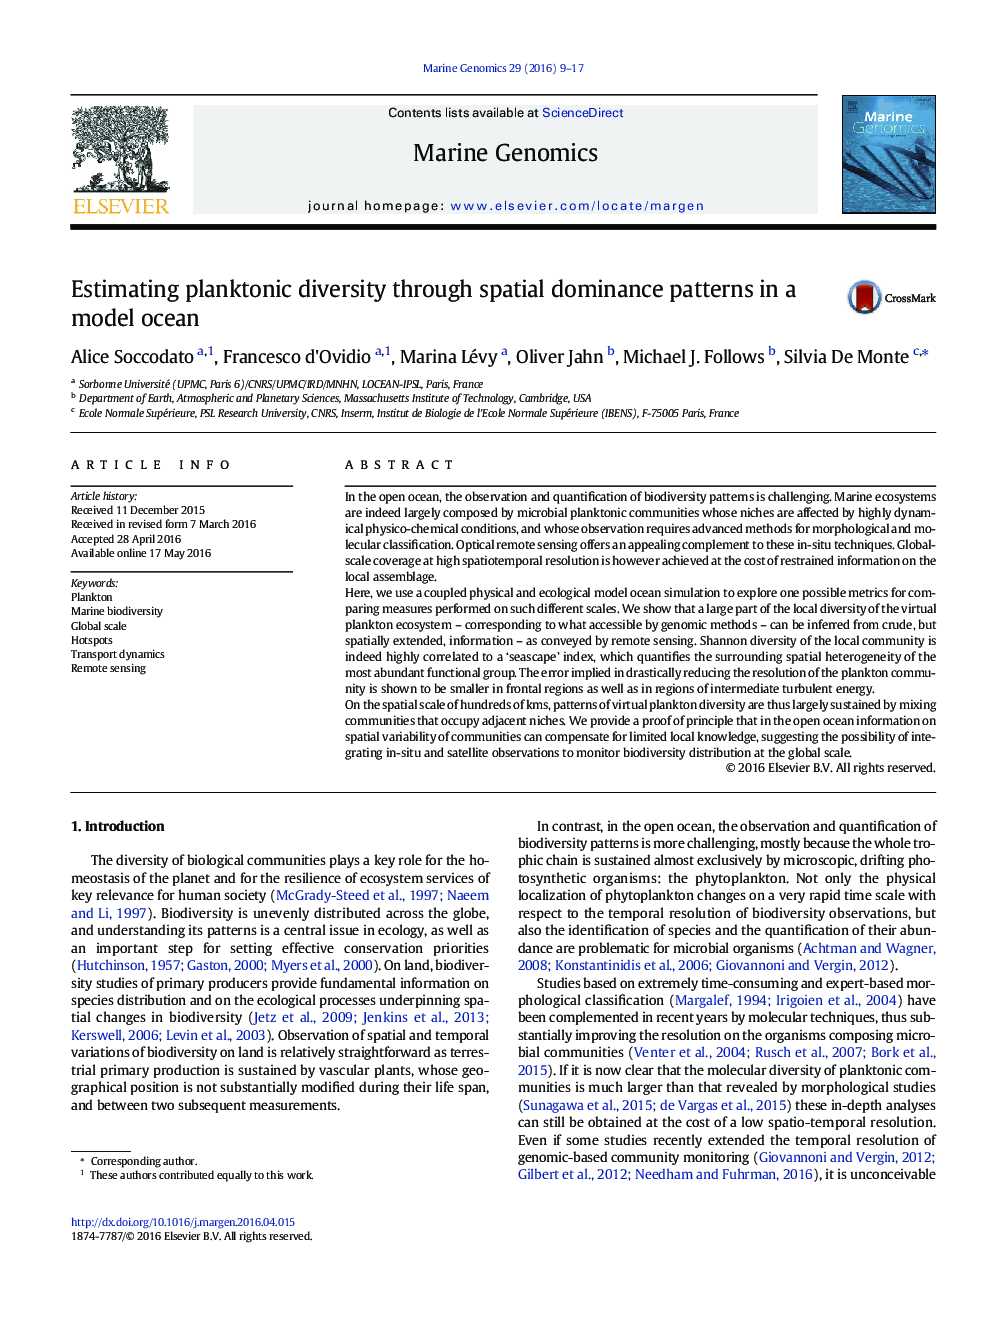 Estimating planktonic diversity through spatial dominance patterns in a model ocean